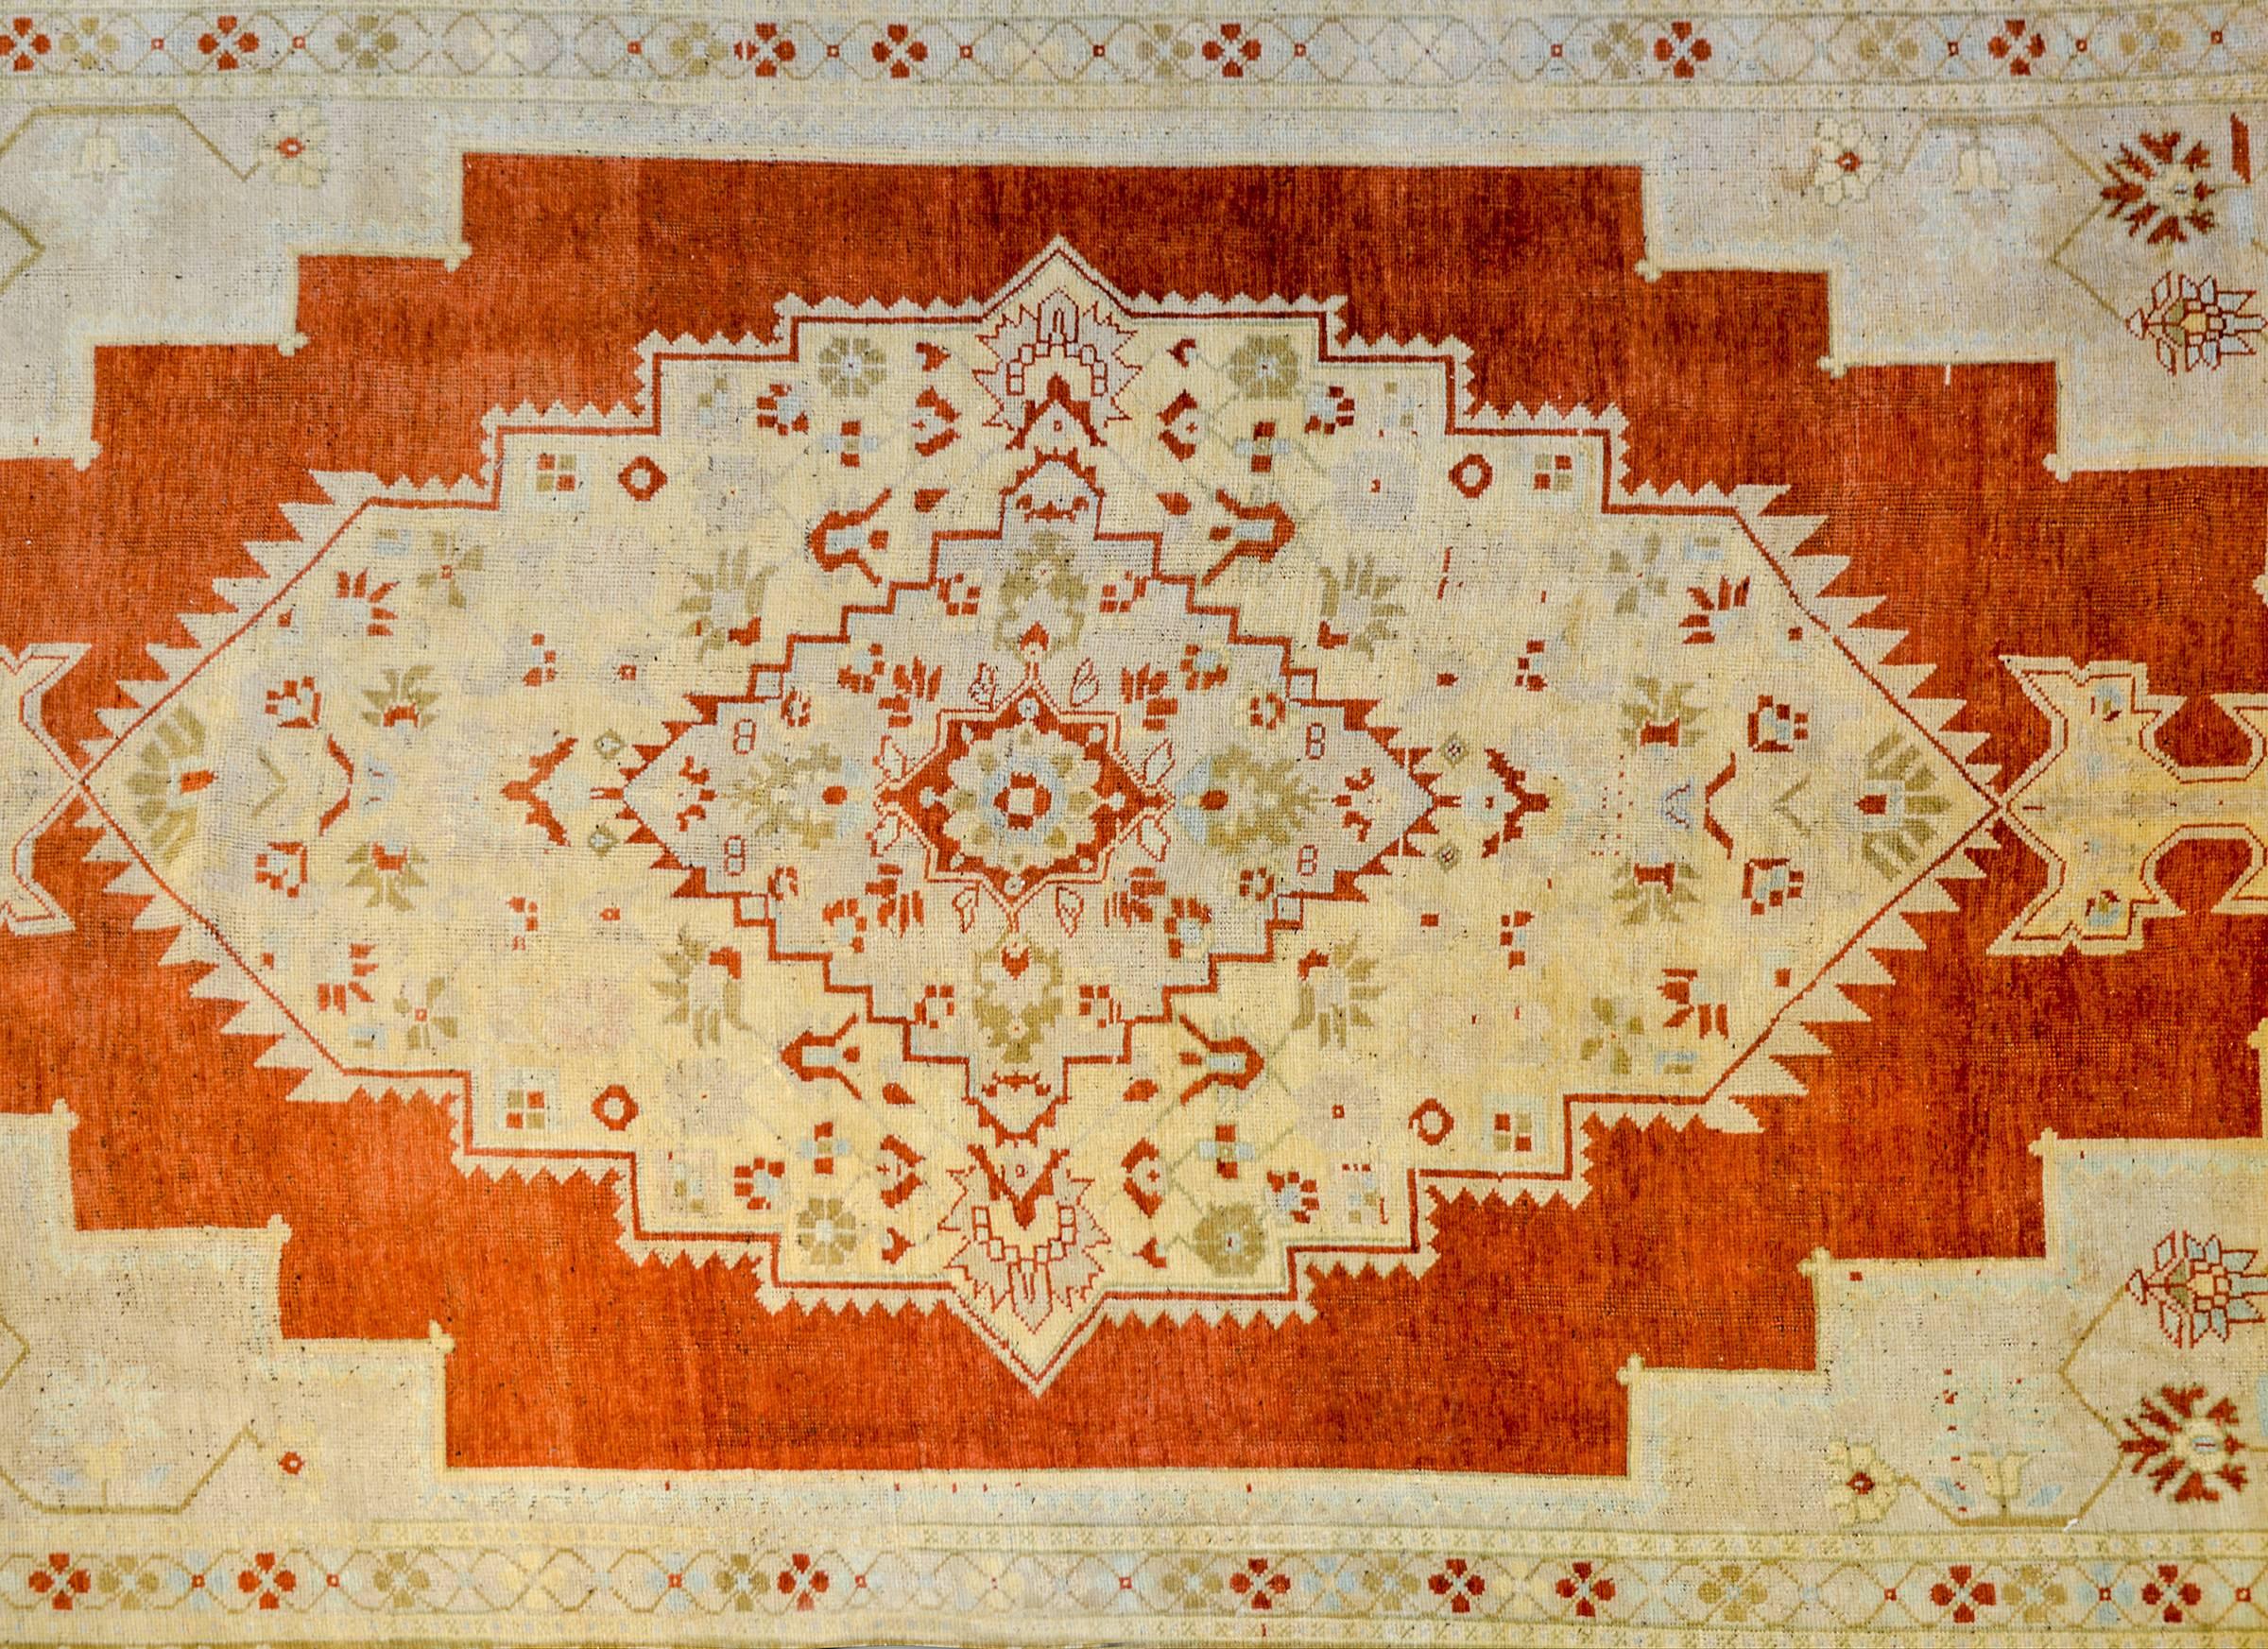 A vintage Turkish Oushak rug with a beautiful pattern woven in orange, gold, green, and cream colored wool. The border is exceptional, with large-scale wide stylized floral and leaf patterned stripe flanked by a matching petite floral and vine